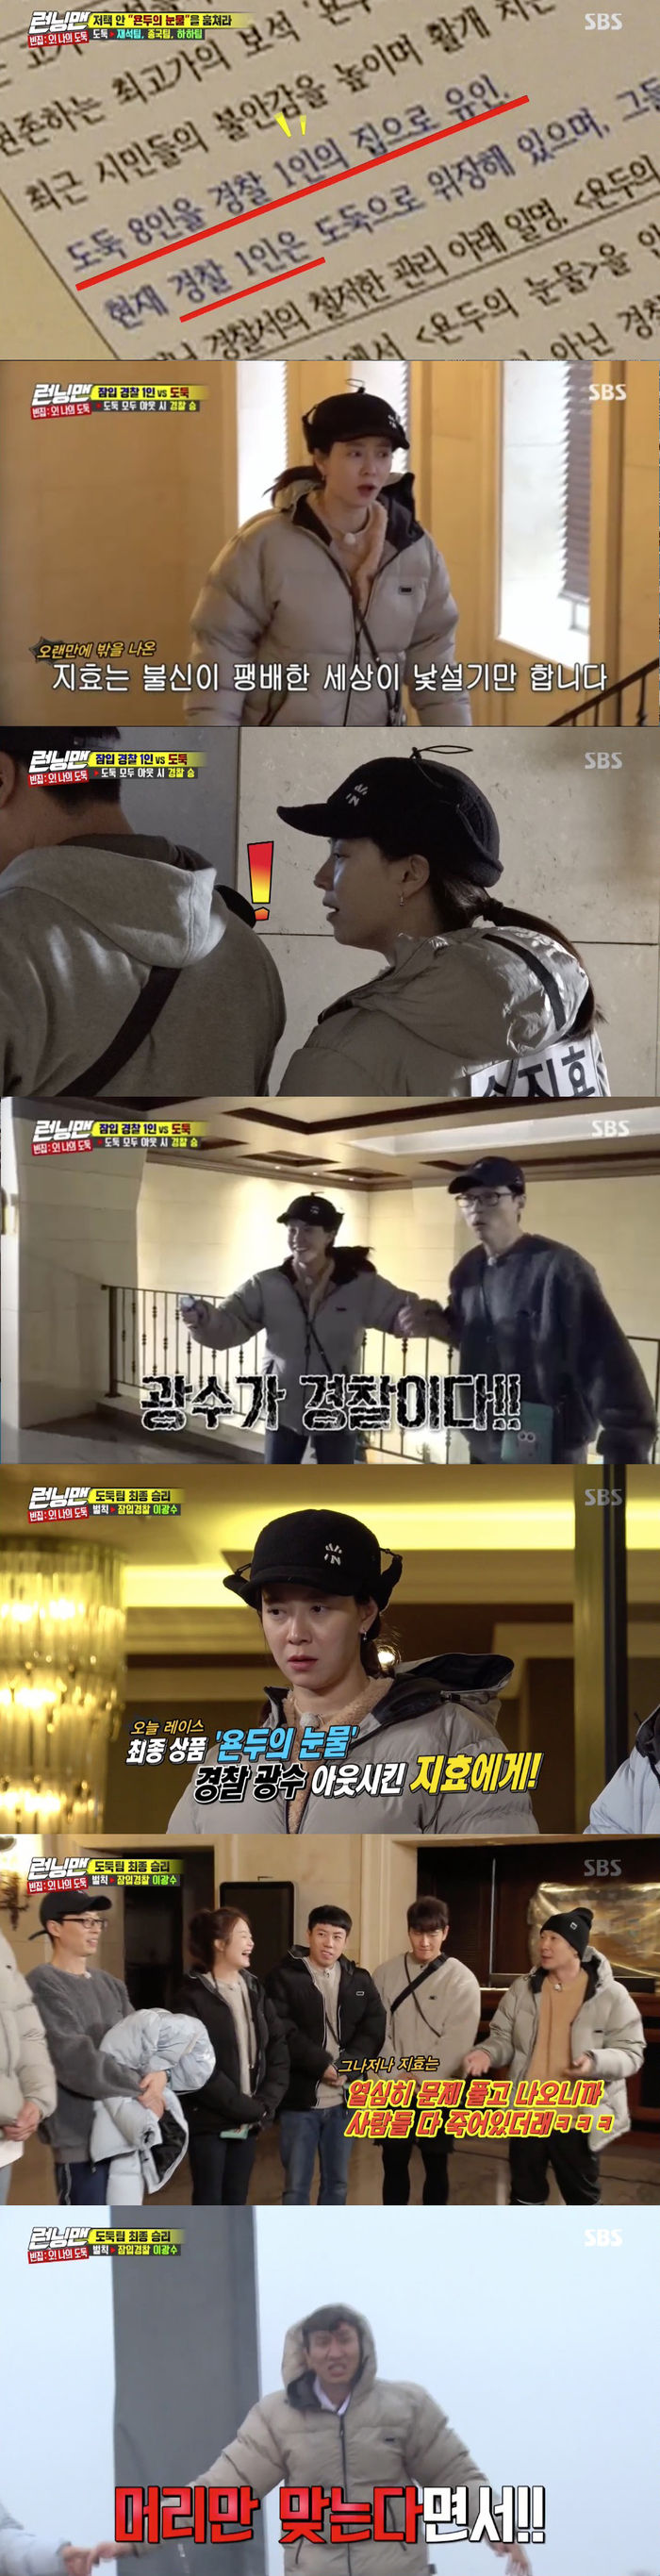 Song Ji-hyo showed off his true value as AceOn SBS Running Man broadcast on the 2nd, Empty House: Oh! My Thief Race was held.On this day, Running Man went out to find the tears of Jewel Yondu hidden in the empty mansion.Running Man was a team of nine thieves who were looking for the property of the empty mansion, and three of them were teamed up to raid the mansion and steal the most expensive items, winning and losing the race.The crew selected the team leaders of each team as Yoo Jae-Suk, Kim Jong-kook, and Haha, and they had a Water gun that could lead one team leader and gun expert to In-N-Out Burger.And they selected Anonymous, who would play the brain role in their team, and an expensive emotional expert who was capable of distinguishing expensive items.The members then performed their missions and headed to the mansion with clues about the place where Yondus tears were.Each team arrived in Anonymouss room with a decisive clue to locate Yondus tears.So Park Ha-na, Jeon So-min and Song Ji-hyo, the anonymous of each team, started the password solving.The code of hardships made Anonymous a menbung.However, with the performance of the team leaders, Anonymous Park Ha-na of the Yoo Jae-Suk team and Anonymous Jeon So-min of the Kim Jong-kook team succeeded in solving the password.But when I solved the password, another password appeared and made Anonymous difficult.In particular, Lee Kwang-soo and Song Ji-hyo, who are left alone with team leader Hahas In-N-Out Burger, were saddened by the difficulty of solving the difficult password.And the Kim Jong-kook team, who first unlocked the password, went to the place where the password pointed to Yondus tears.But what is hidden there is not Yondus tears, but a file of documents, which also at this time Jeon So-min urgently shouted Kim Jong-kooks name.Kim Jong-kook was in-N-Out Burger while he went to unlock the password.Kim Jong-kook checked the document he found.The document contained One in nine thieves is The Mole Song: Undercover Agent Reiji Police, and the place where thieves go to steal is Polices house and the jewels are owned by Police.However, when Kim Jong-kook found out the precious information, he was discovered by Police who patrolled and was in-N-Out Burger.Yoo Jae-Suk, who later learned of the hidden hidden hidden hidden hidden by The Mole Song: Undercover Agent Reiji Police among the thieves, tried to make this content with Park Ha-na and Gong Yoo.But Park Ha-na was in-N-Out Burger just before meeting Yoo Jae-Suk.So Yoo Jae-Suk told the surviving Song Ji-hyo, Lee Kwang-soo that there was The Mole Song: Undercover Agent Reiji Police.The three remaining people doubted each other, especially Lee Kwang-soo, who looked at the photos of Yoo Jae-Suk hanging in the mansion and suspected, Why are there pictures in this house?But Yoo Jae-Suk said, Thats just a trap, and suggested taking off the bulletproof vest worn by the wilderness and confronting it on the same terms.Lee Kwang-soo was forced to take off his bulletproof vest.Song Ji-hyo, who watched this, witnessed Lee Kwang-soo that he had a pink water gun.Unlike the Water Gun on Thieves, The Mole Song: The Undercover Agent Reiji Police had a pink Water Gun, which Lee Kwang-soo was The Mole Song: Undercover Agent Reiji Han Police to catch thieves.Yoo Jae-Suk and Song Ji-hyo faced Lee Kwang-soo, and eventually Song Ji-hyo hit Water Gun on Lee Kwang-soos Name tag to win the Thieves final victory.And Yondus tears went to The Mole Song: Song Ji-hyo who removed Undercover Agent Reiji Police.In particular, Song Ji-hyo was trapped in Anonymouss room throughout the race because he could not solve the password.But at the crucial moment, he showed off his true value as Ace by removing the spy.Meanwhile, the defeated The Mole Song: Undercover Agent Reiji Police Lee Kwang-soo was laughed after being penalised for a solo water cannon.